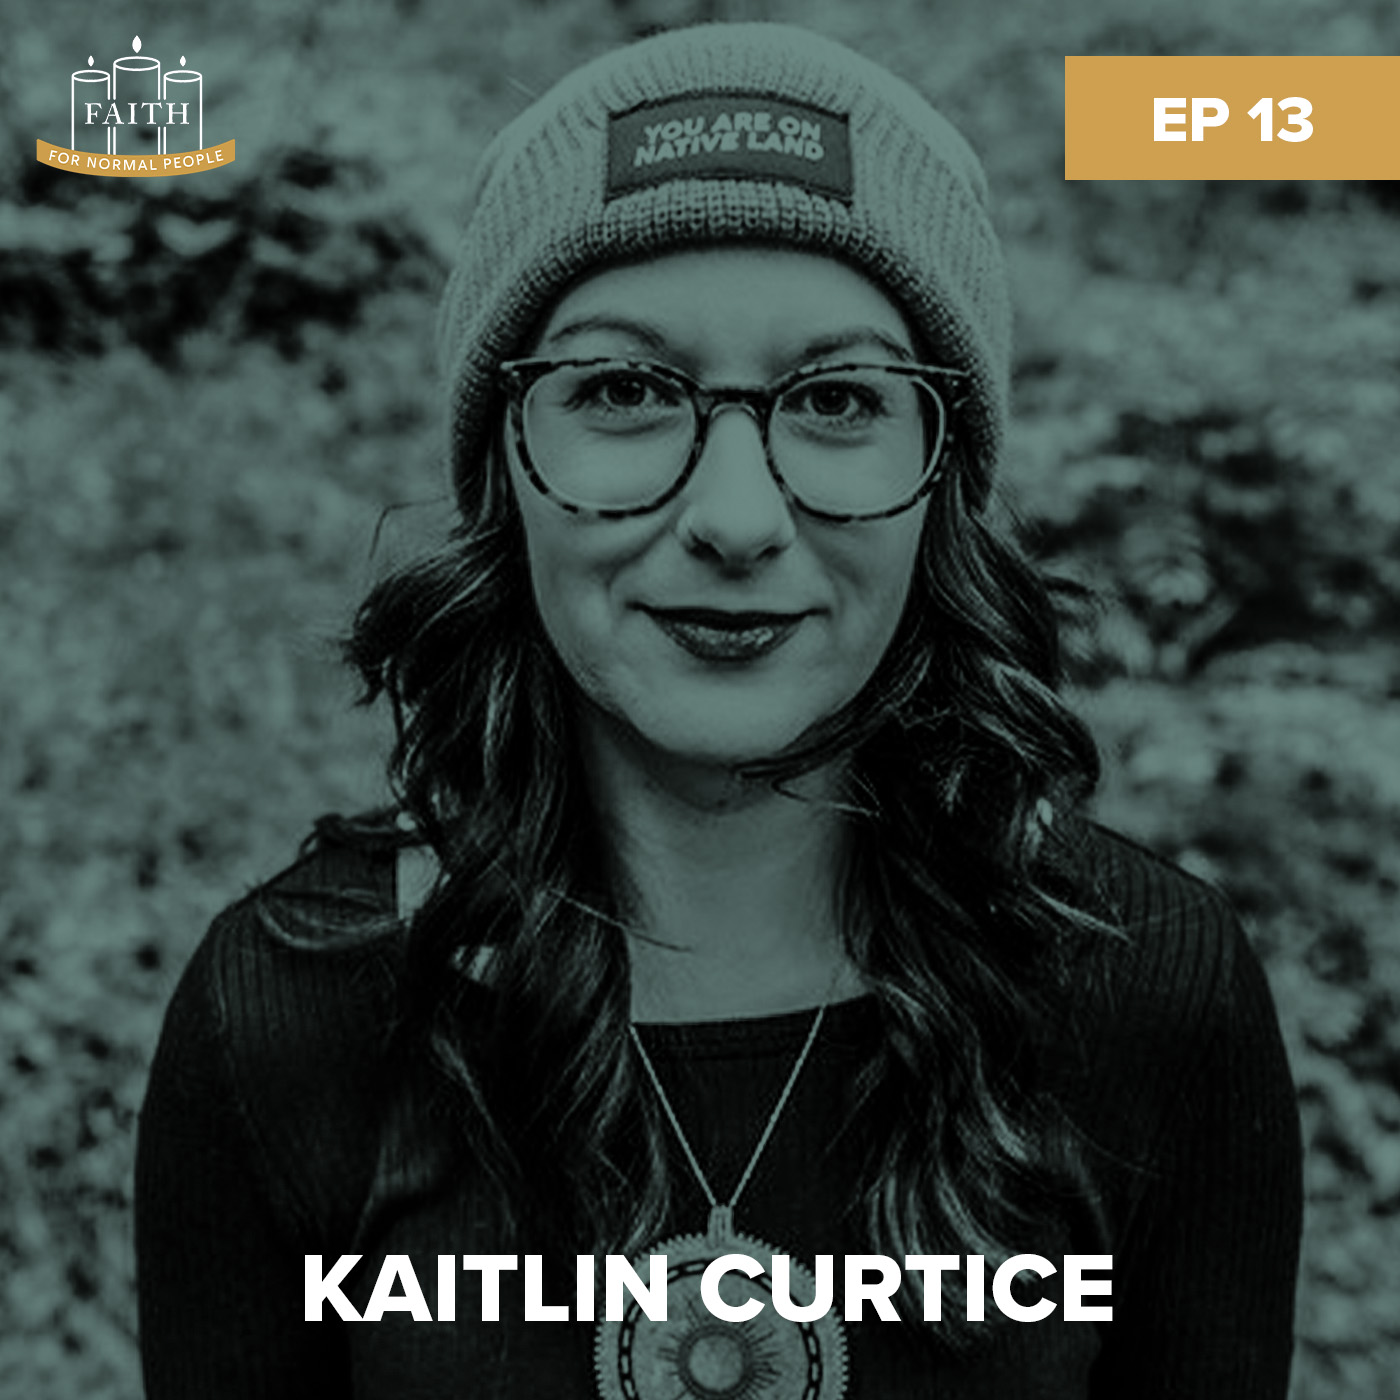 Episode 13: Kaitlin Curtice – A Fresh Vision for the Spiritual Life